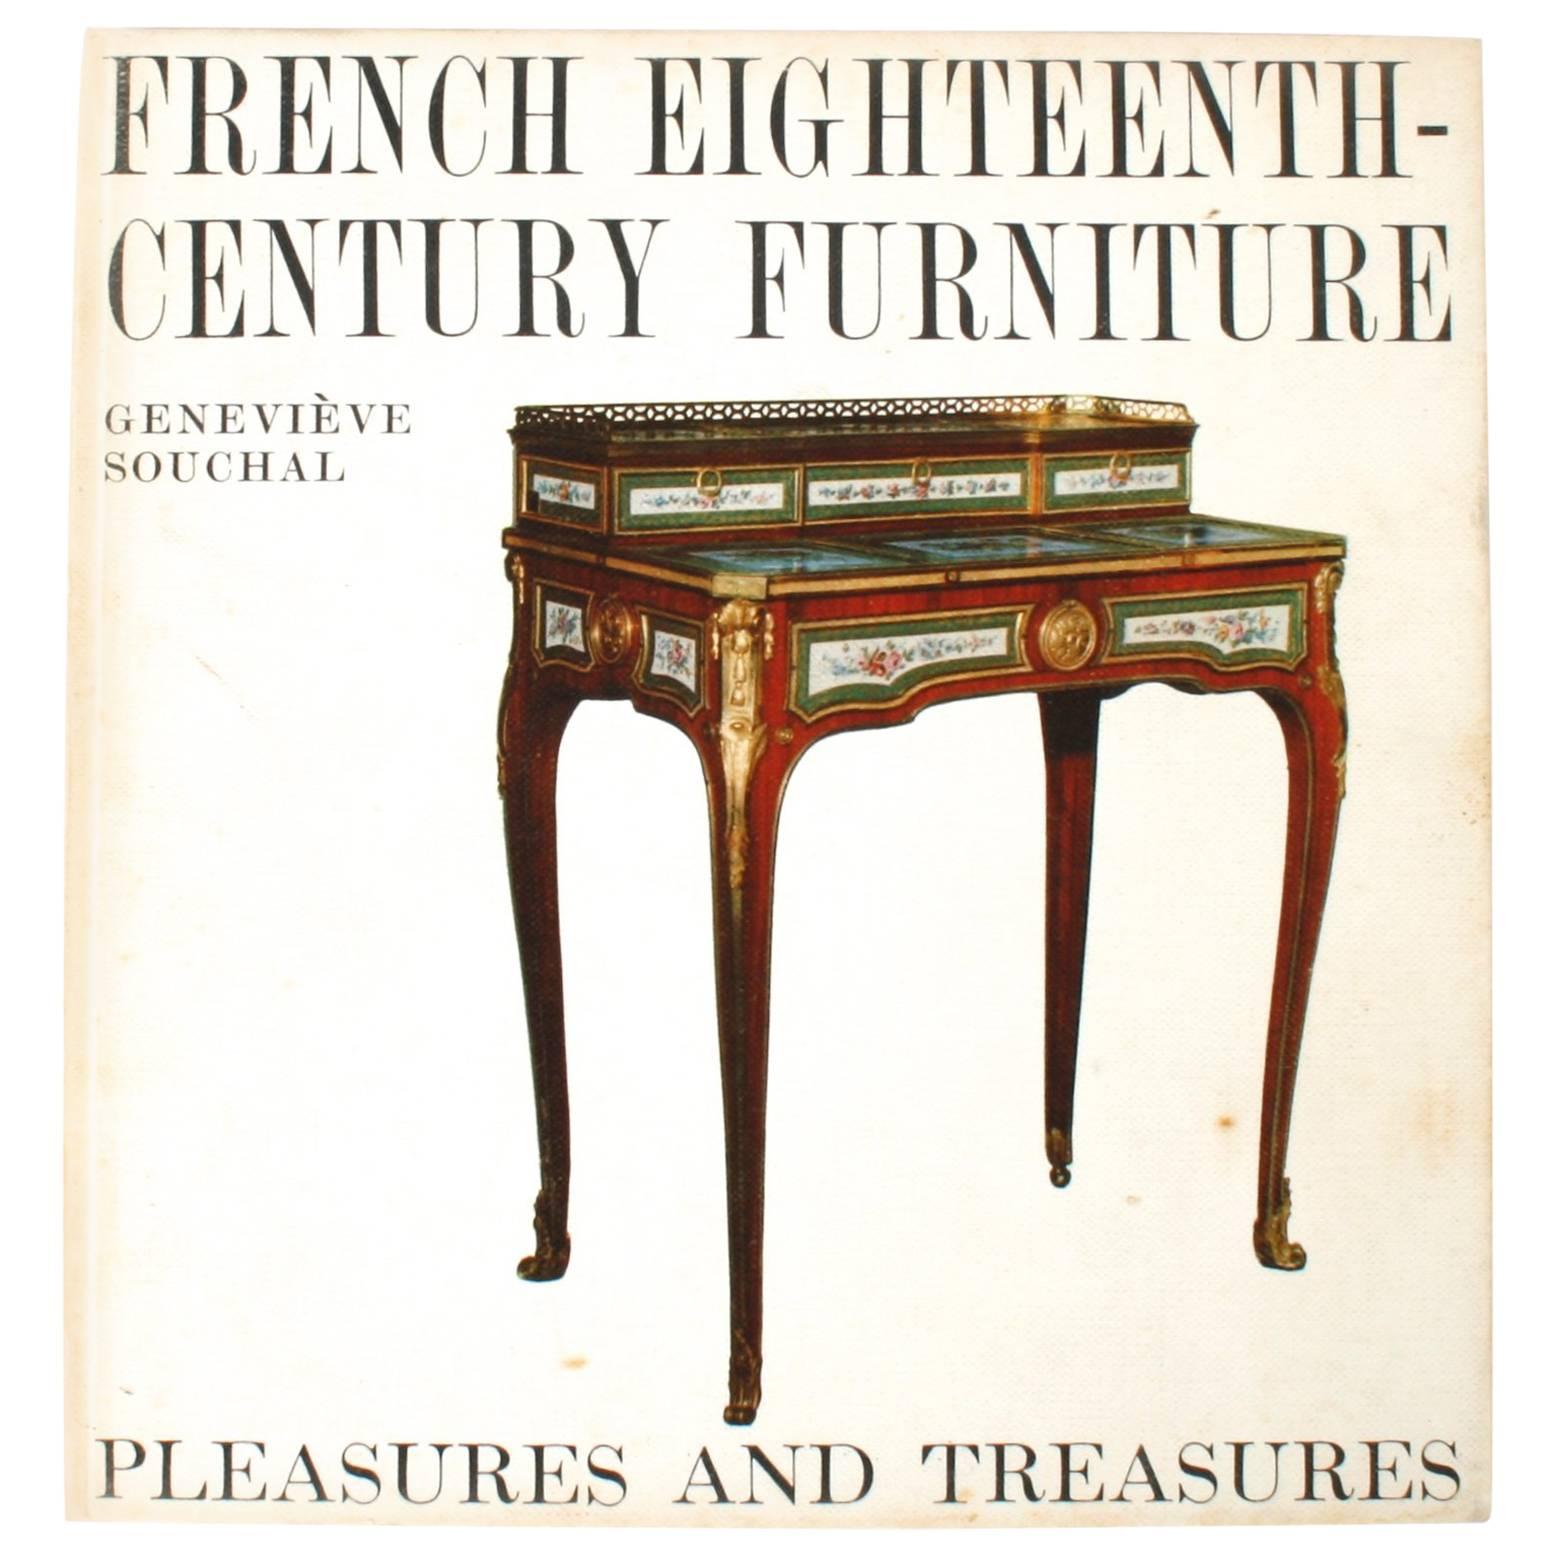 French Eighteenth Century Furniture by Genevieve Souchal, First Edition